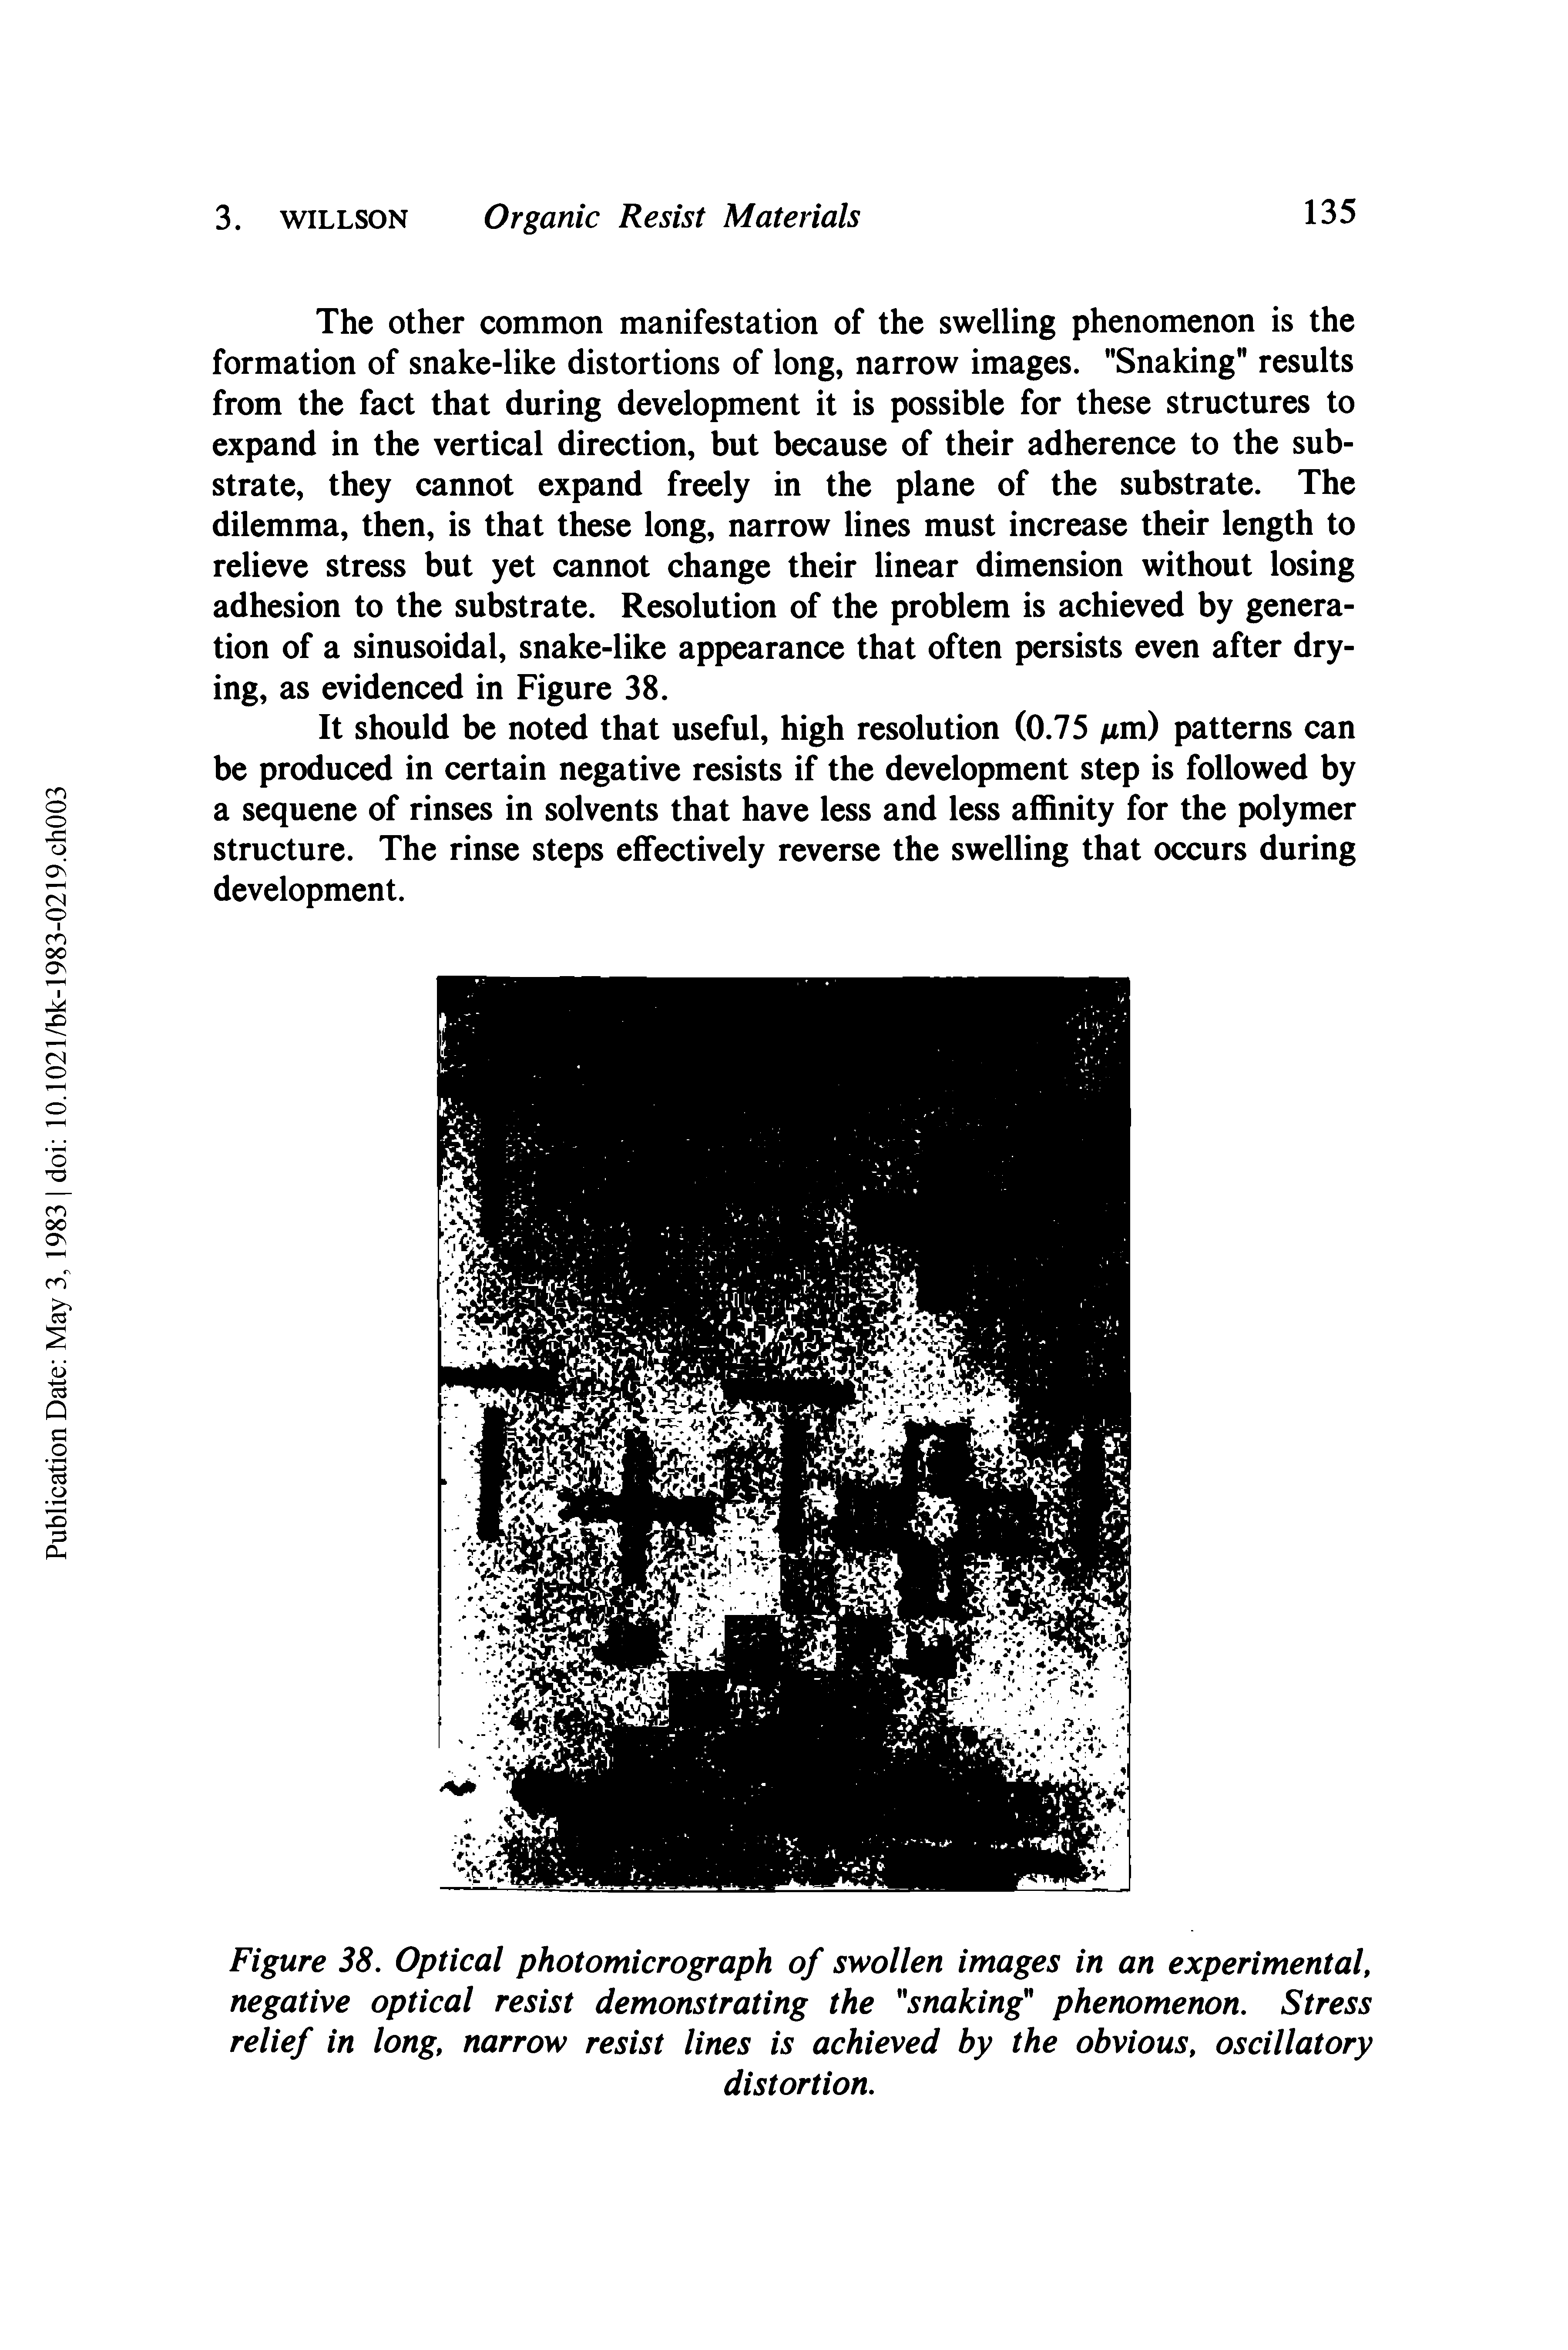 Figure 38. Optical photomicrograph of swollen images in an experimental, negative optical resist demonstrating the snaking phenomenon. Stress relief in long, narrow resist lines is achieved by the obvious, oscillatory...